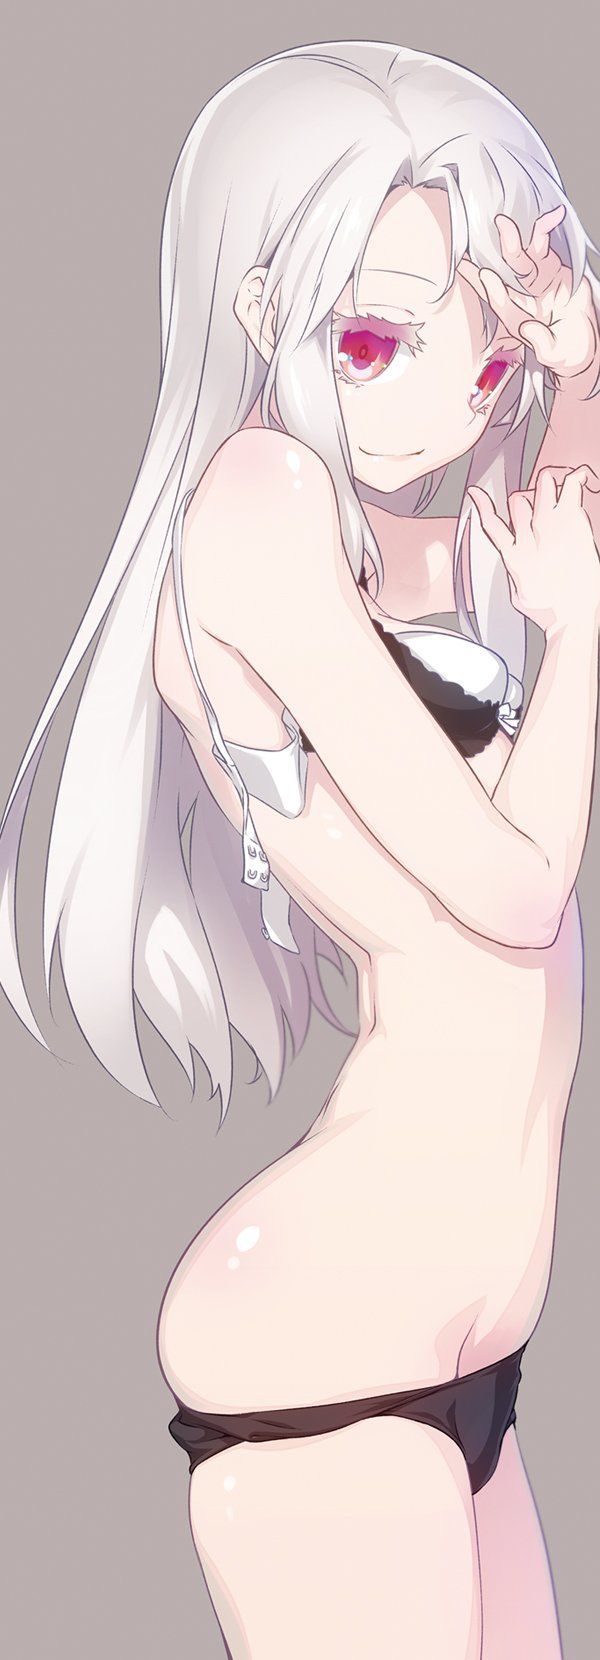 [2nd edition] Beautiful silver hair girl secondary erotic image Part 11 [Silver hair] 28